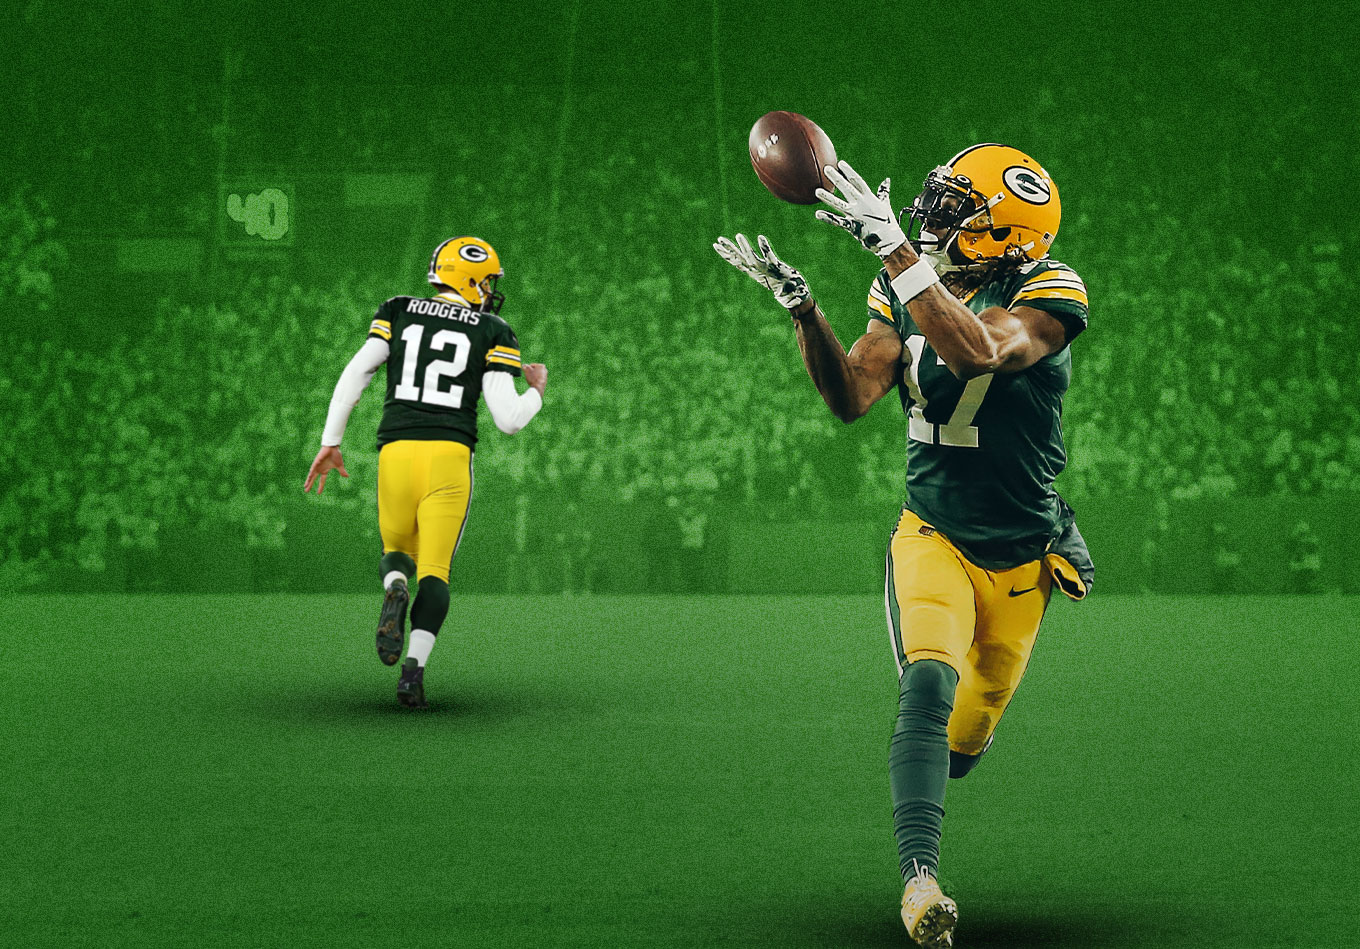 Save the Last Dance: How the Packers Can Make a Rodgers-Adams Swansong Successful